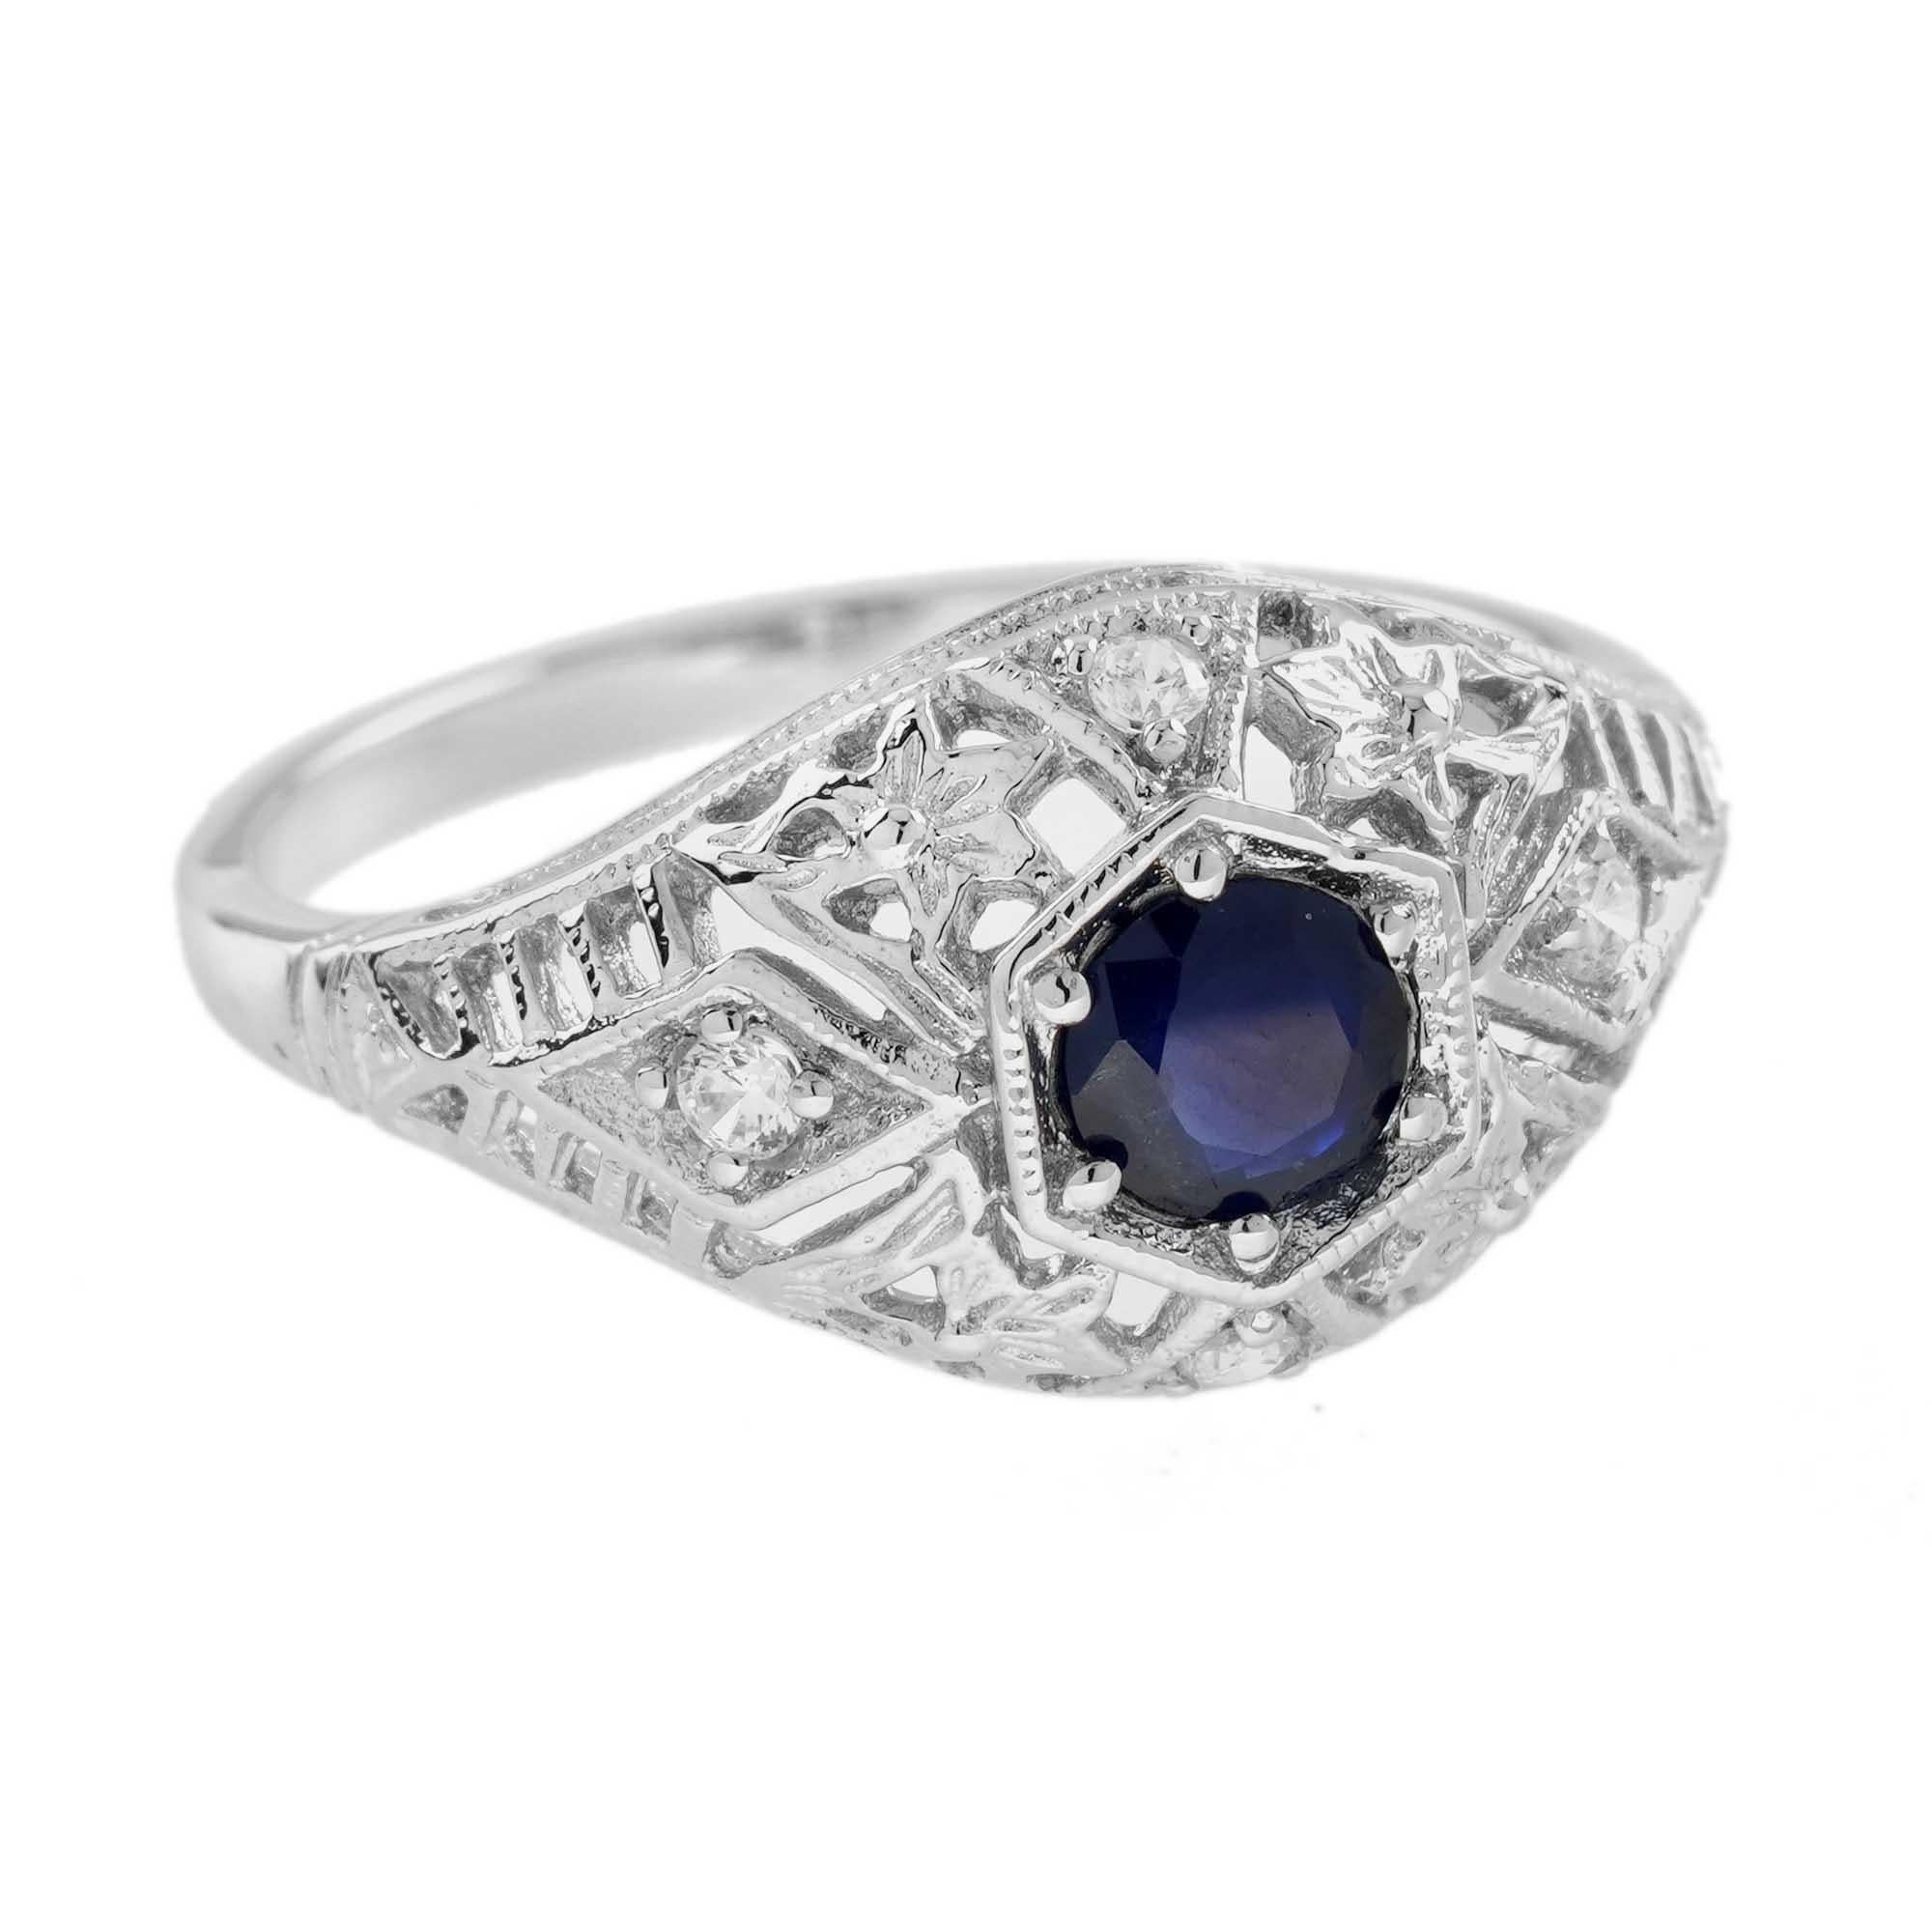 For Sale:  Natural Blue Sapphire Diamond Vintage Style Filigree Ring in 9K White Gold